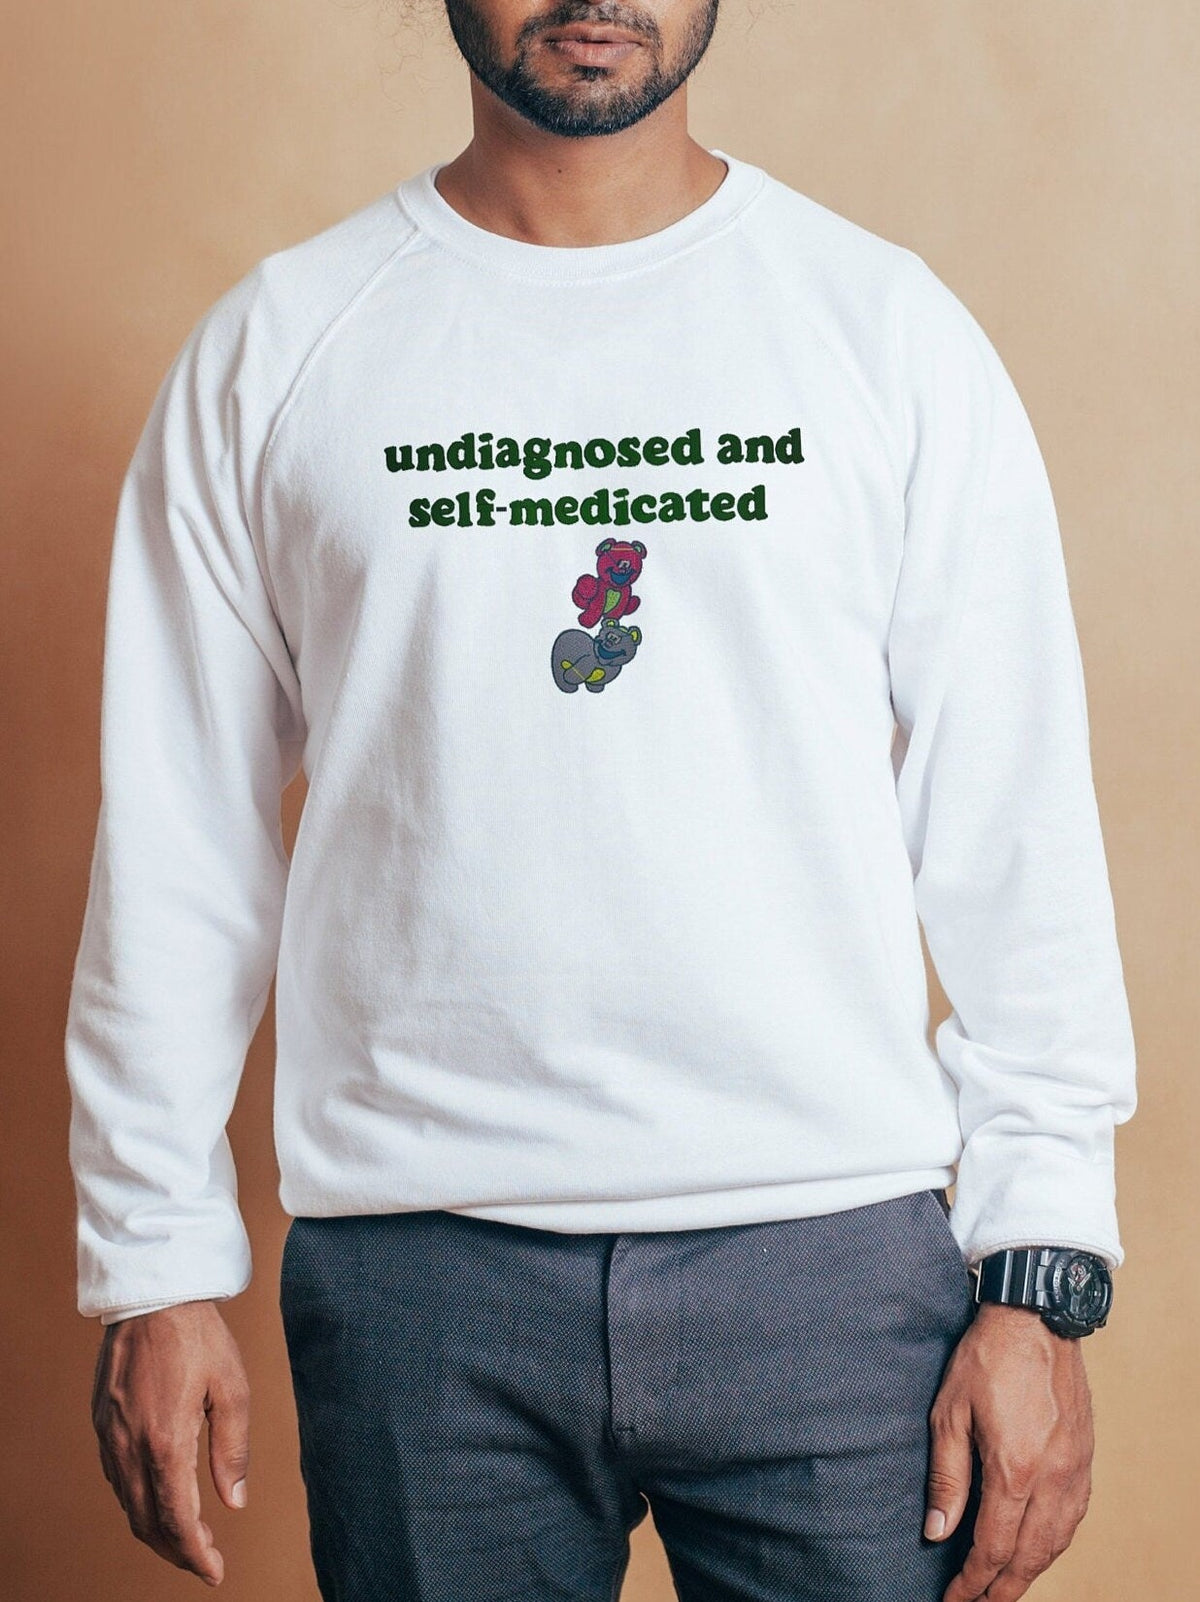 Undiagnosed and Self-Medicated Embroidered T-Shirt or Crewneck | Funny Sweatshirt | Funny Tee | Funny Embroidered Crewneck | Gift for Him